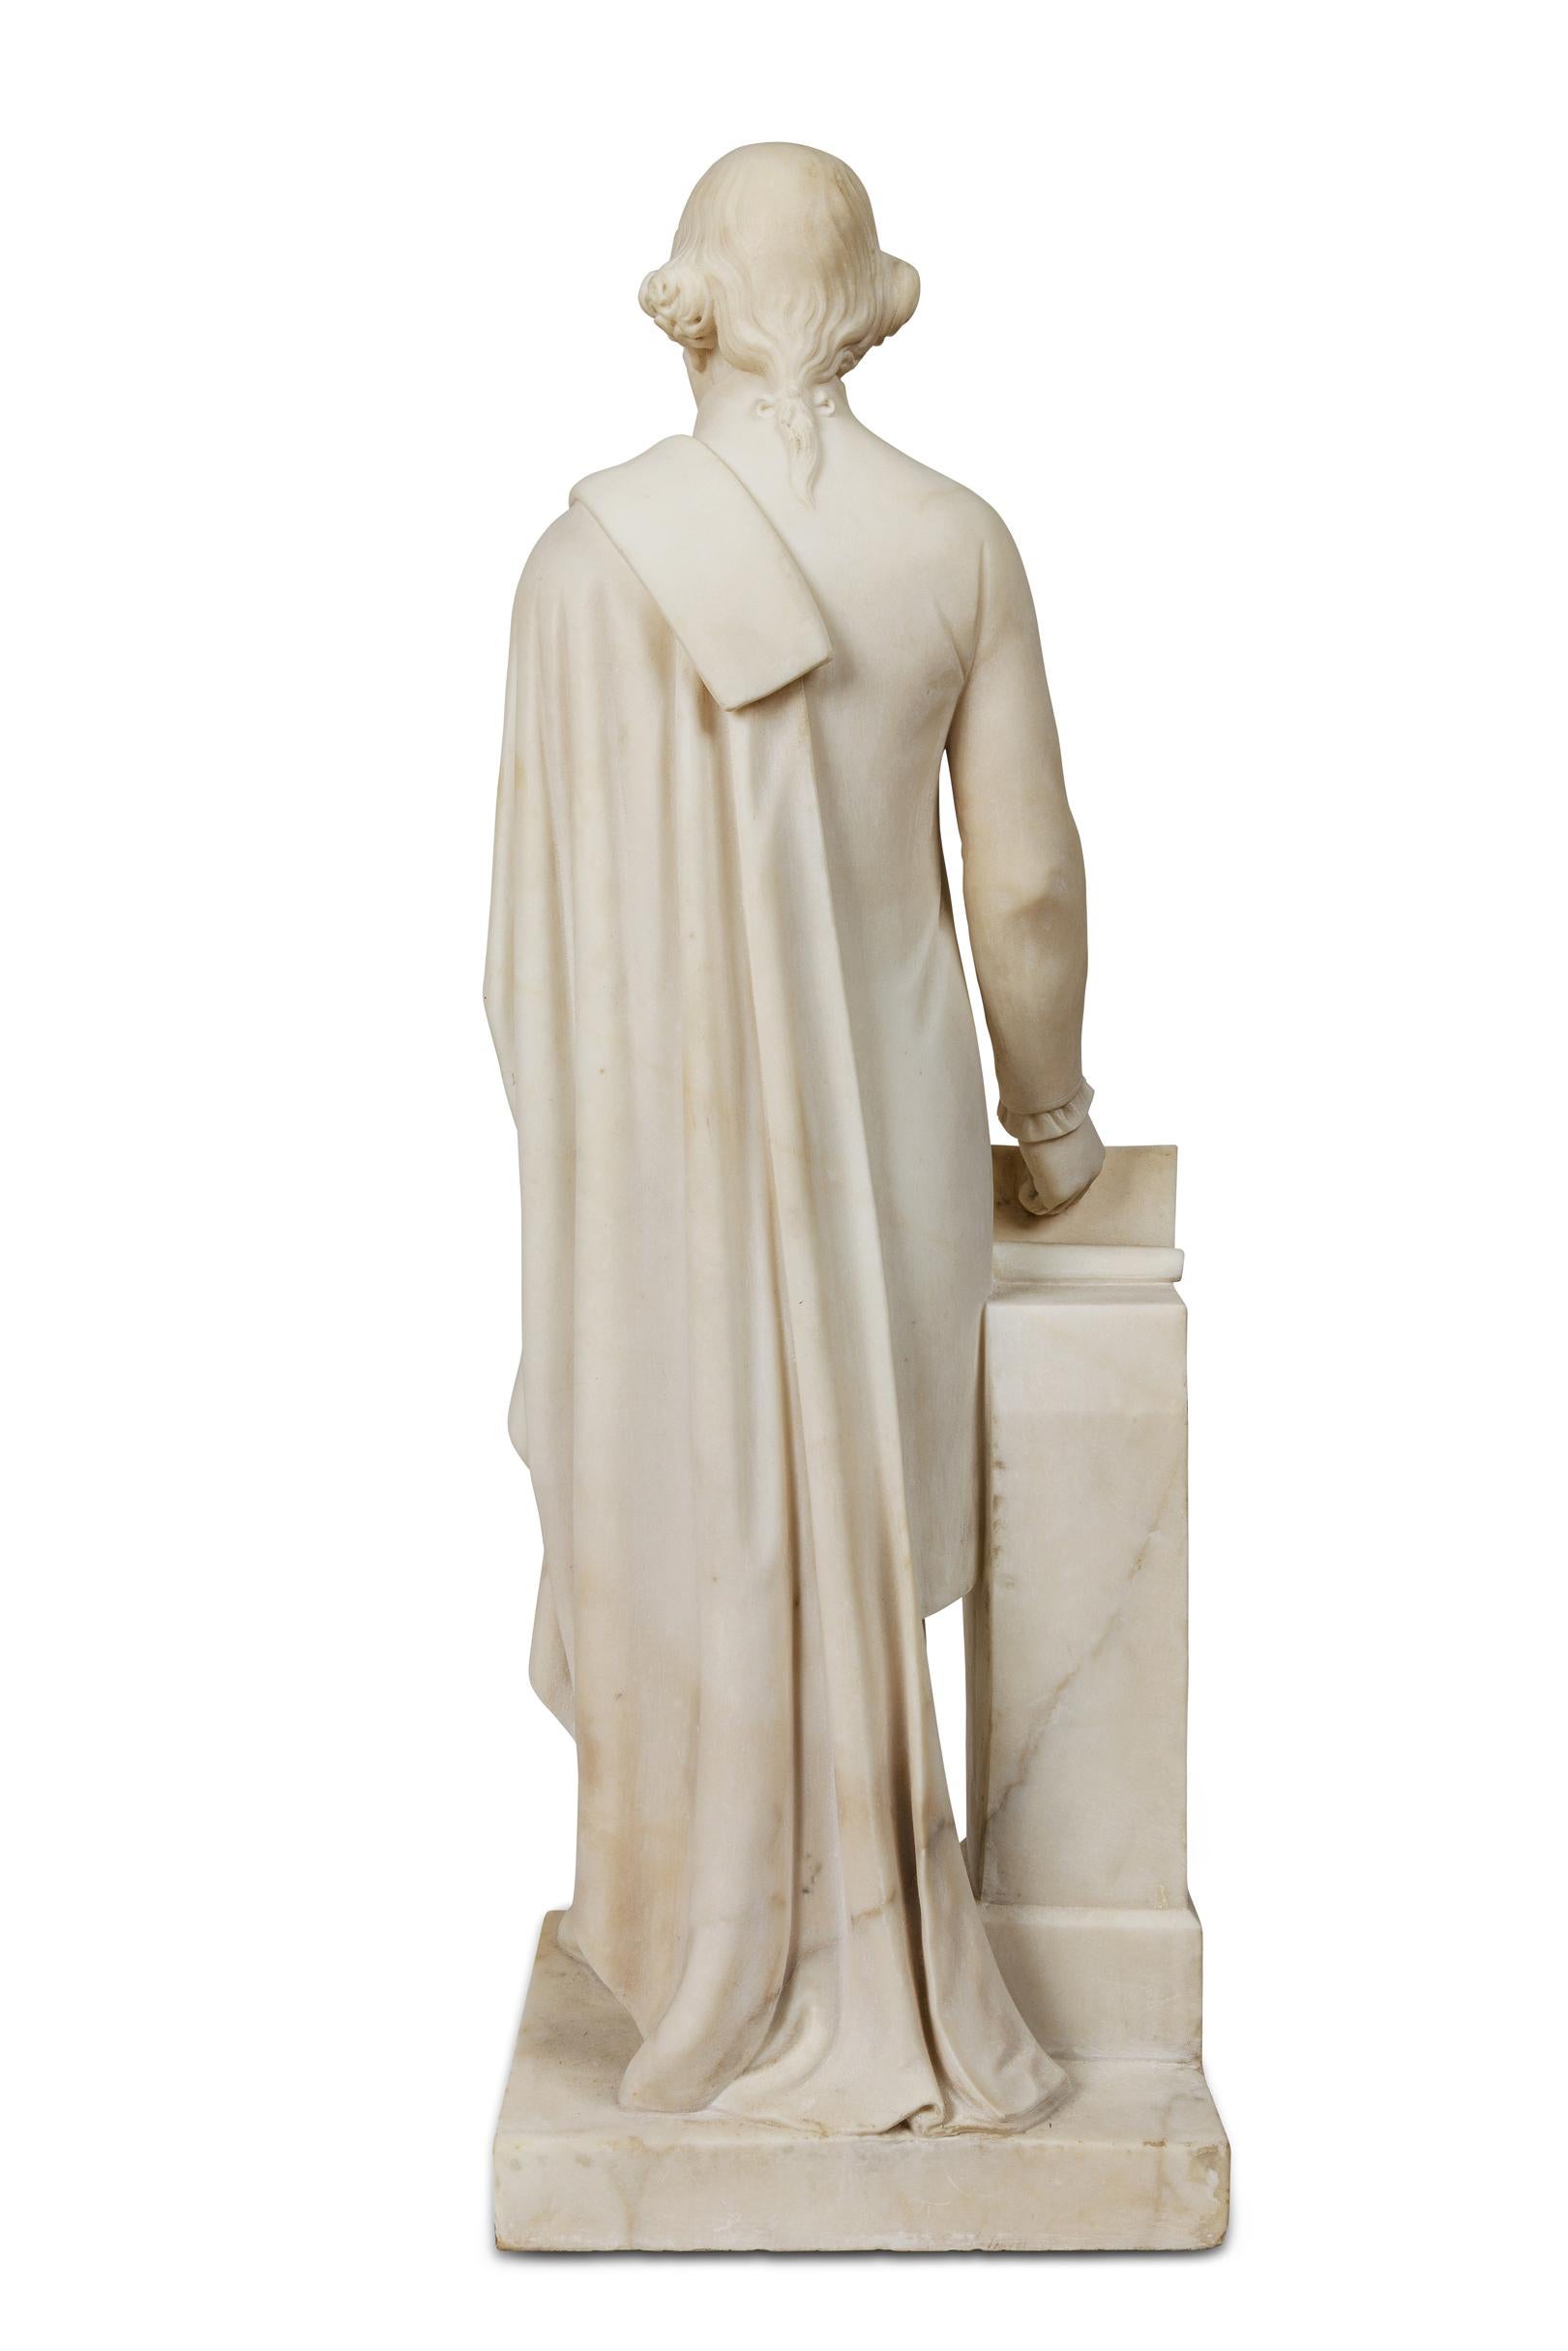 A Rare and Important American Marble Sculpture of Thomas Jefferson, Circa 1870 In Good Condition For Sale In New York, NY